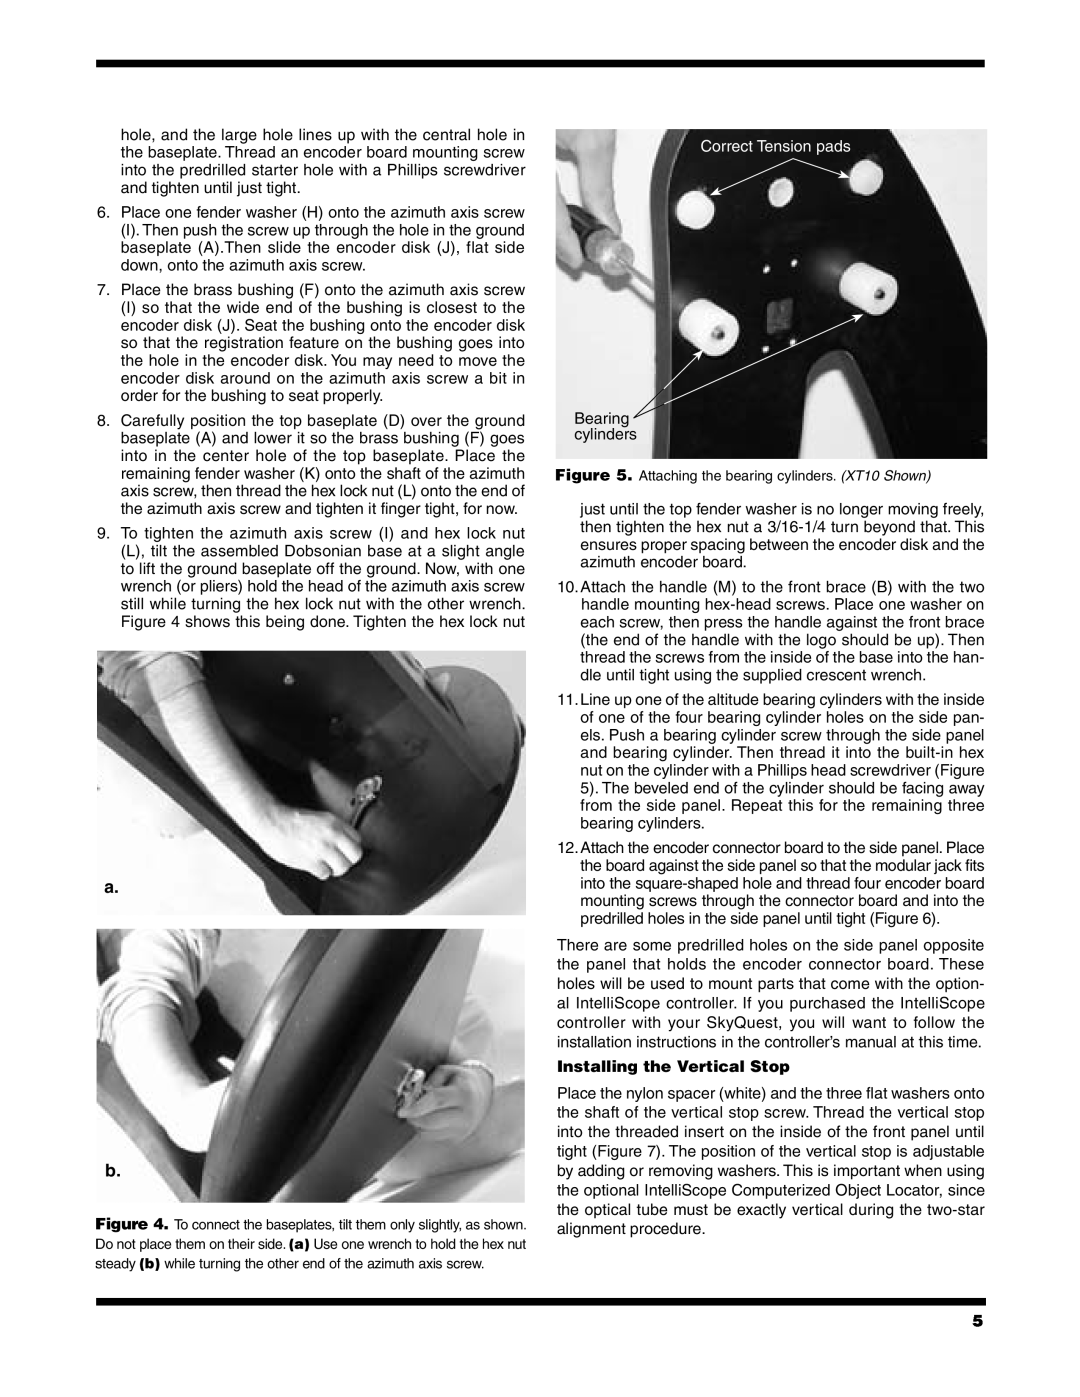 Orion XT10, XT6, XT8 instruction manual Correct Tension pads, Installing the Vertical Stop 